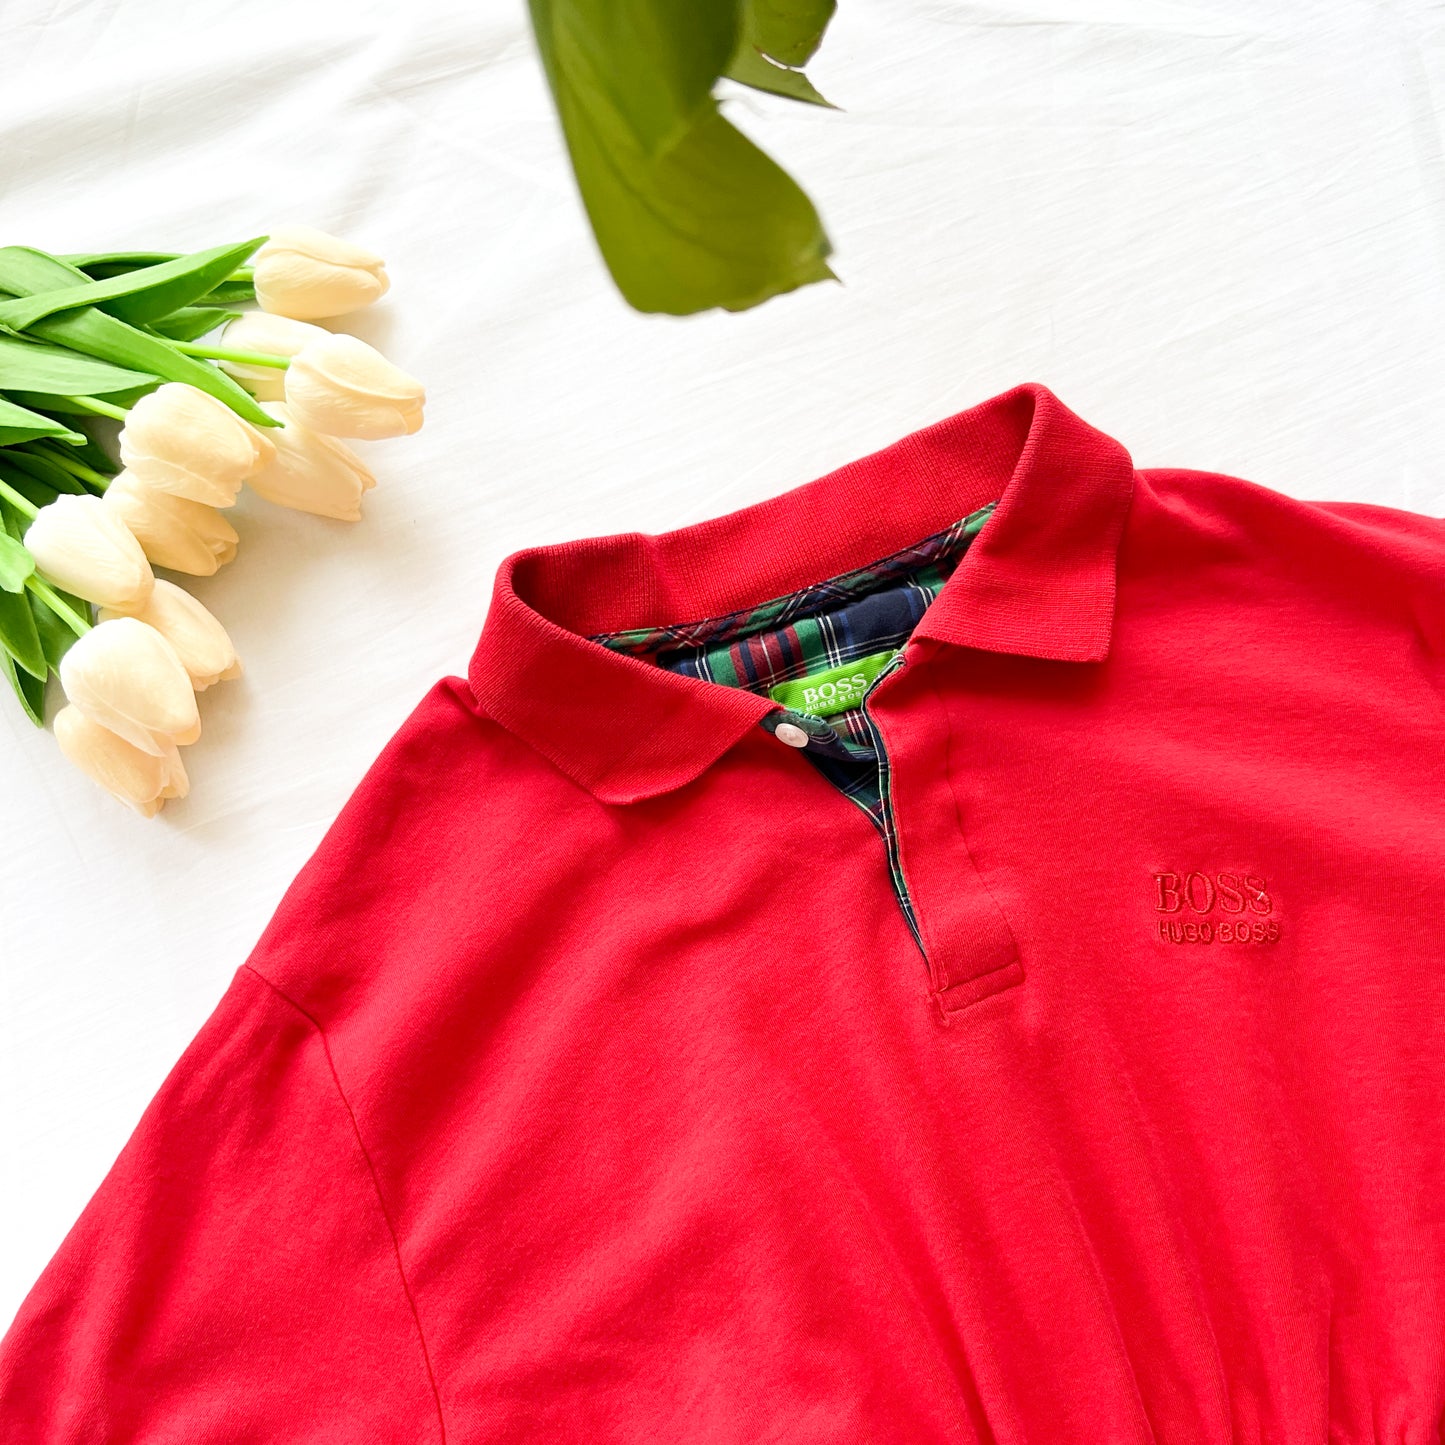 (S/M) Hugo Boss polo crop vintage red